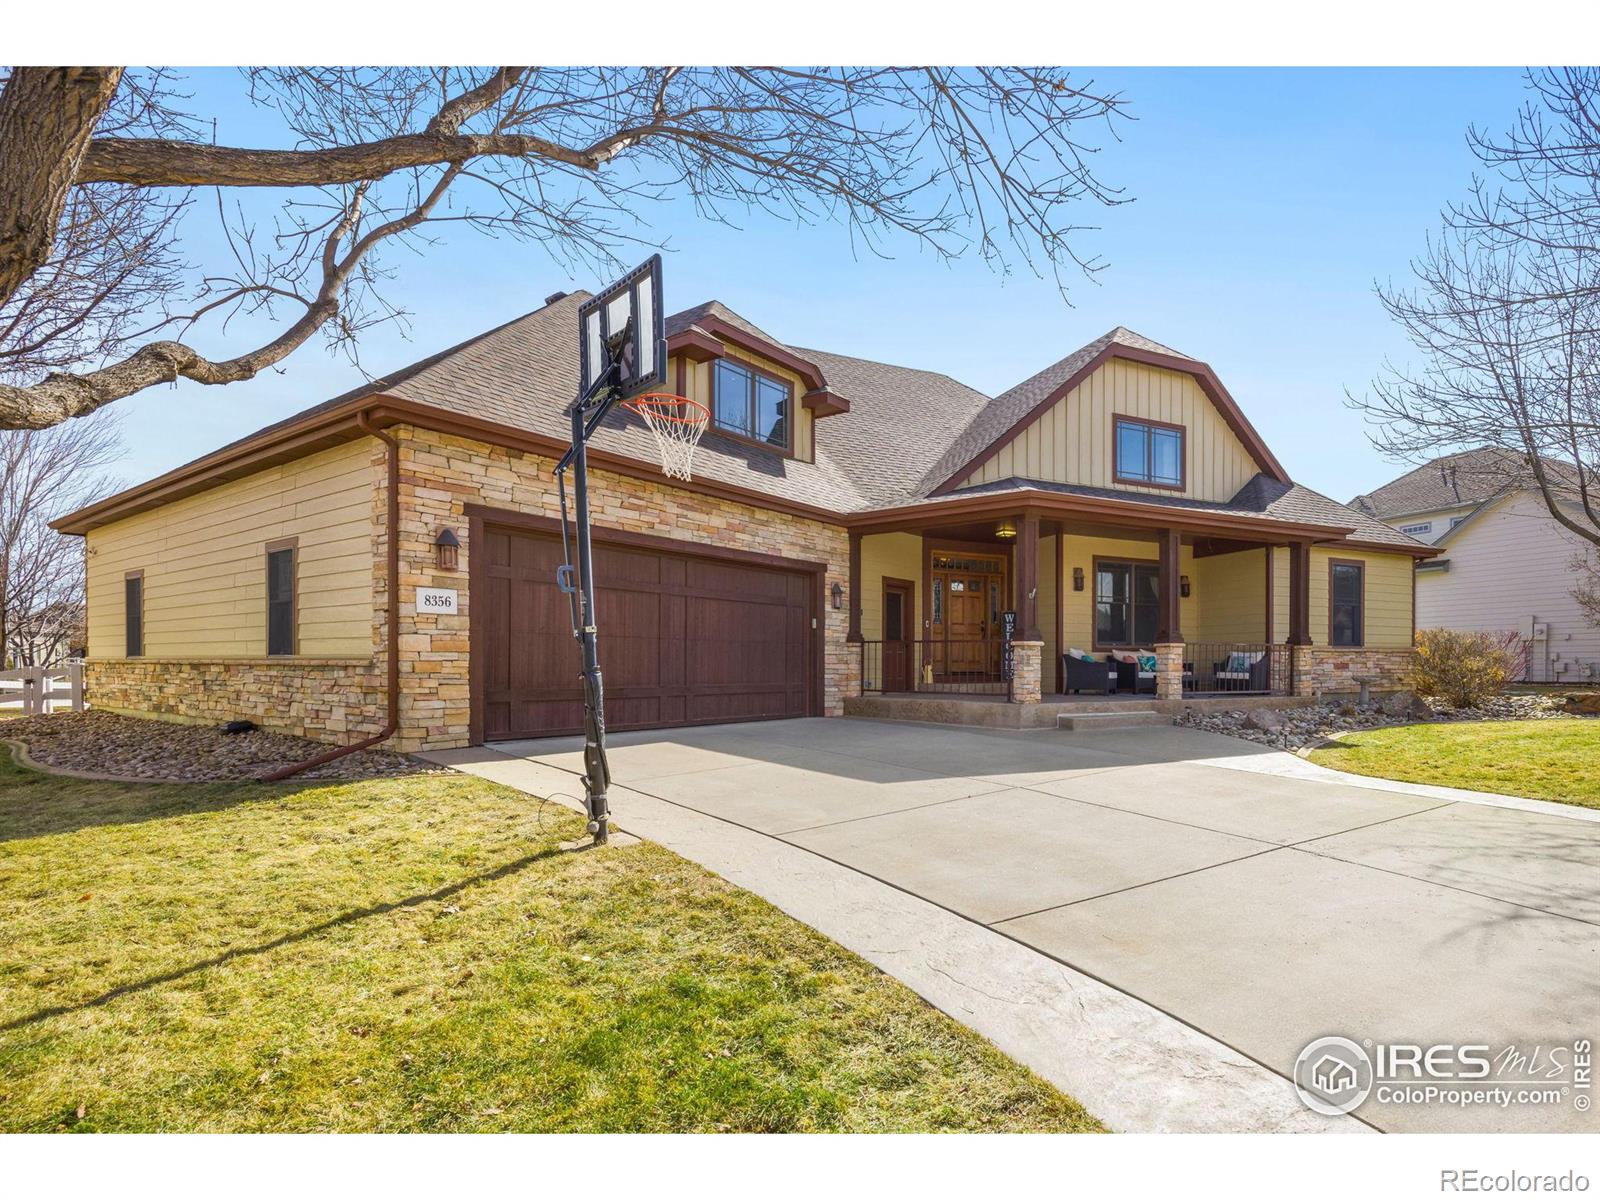 Report Image for 8356  Stay Sail Drive,Windsor, Colorado